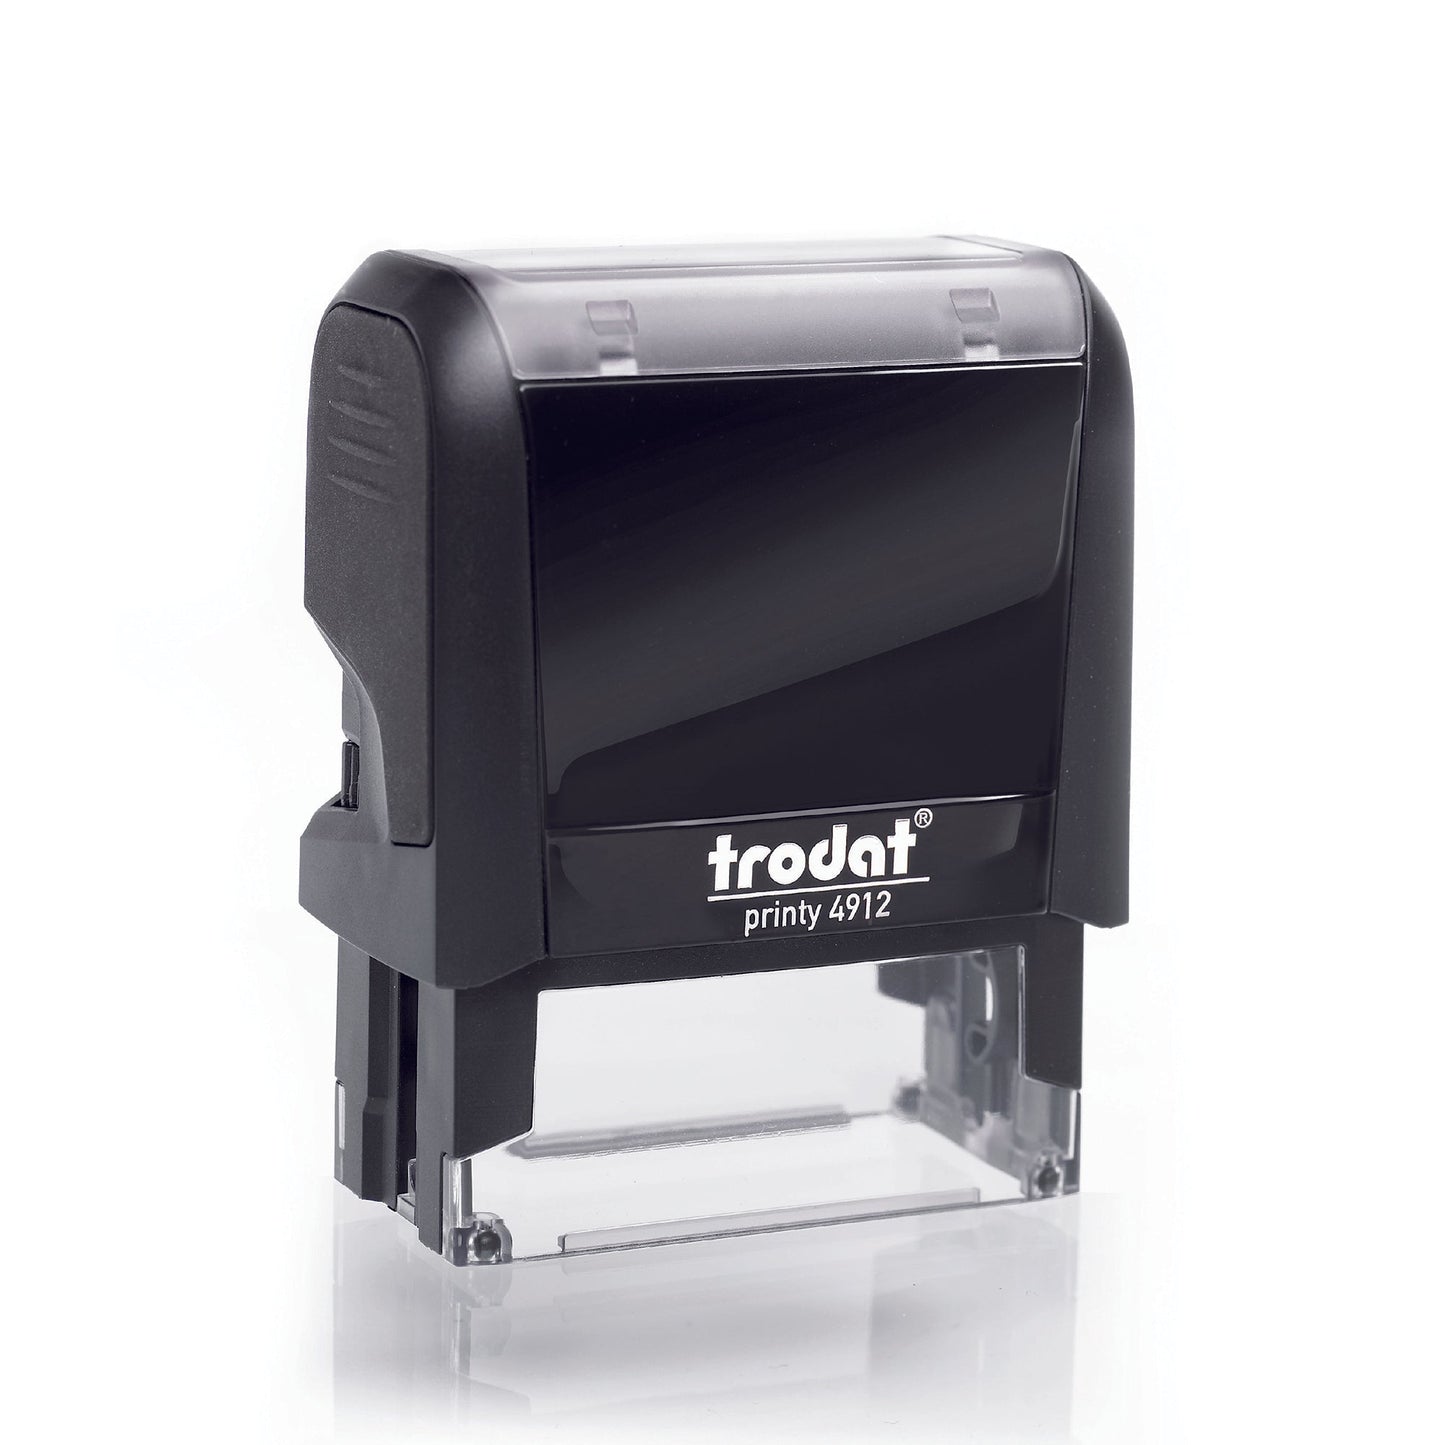 Refunded - Rubber Stamp - Trodat 4912 - 45mm x 6mm Impression